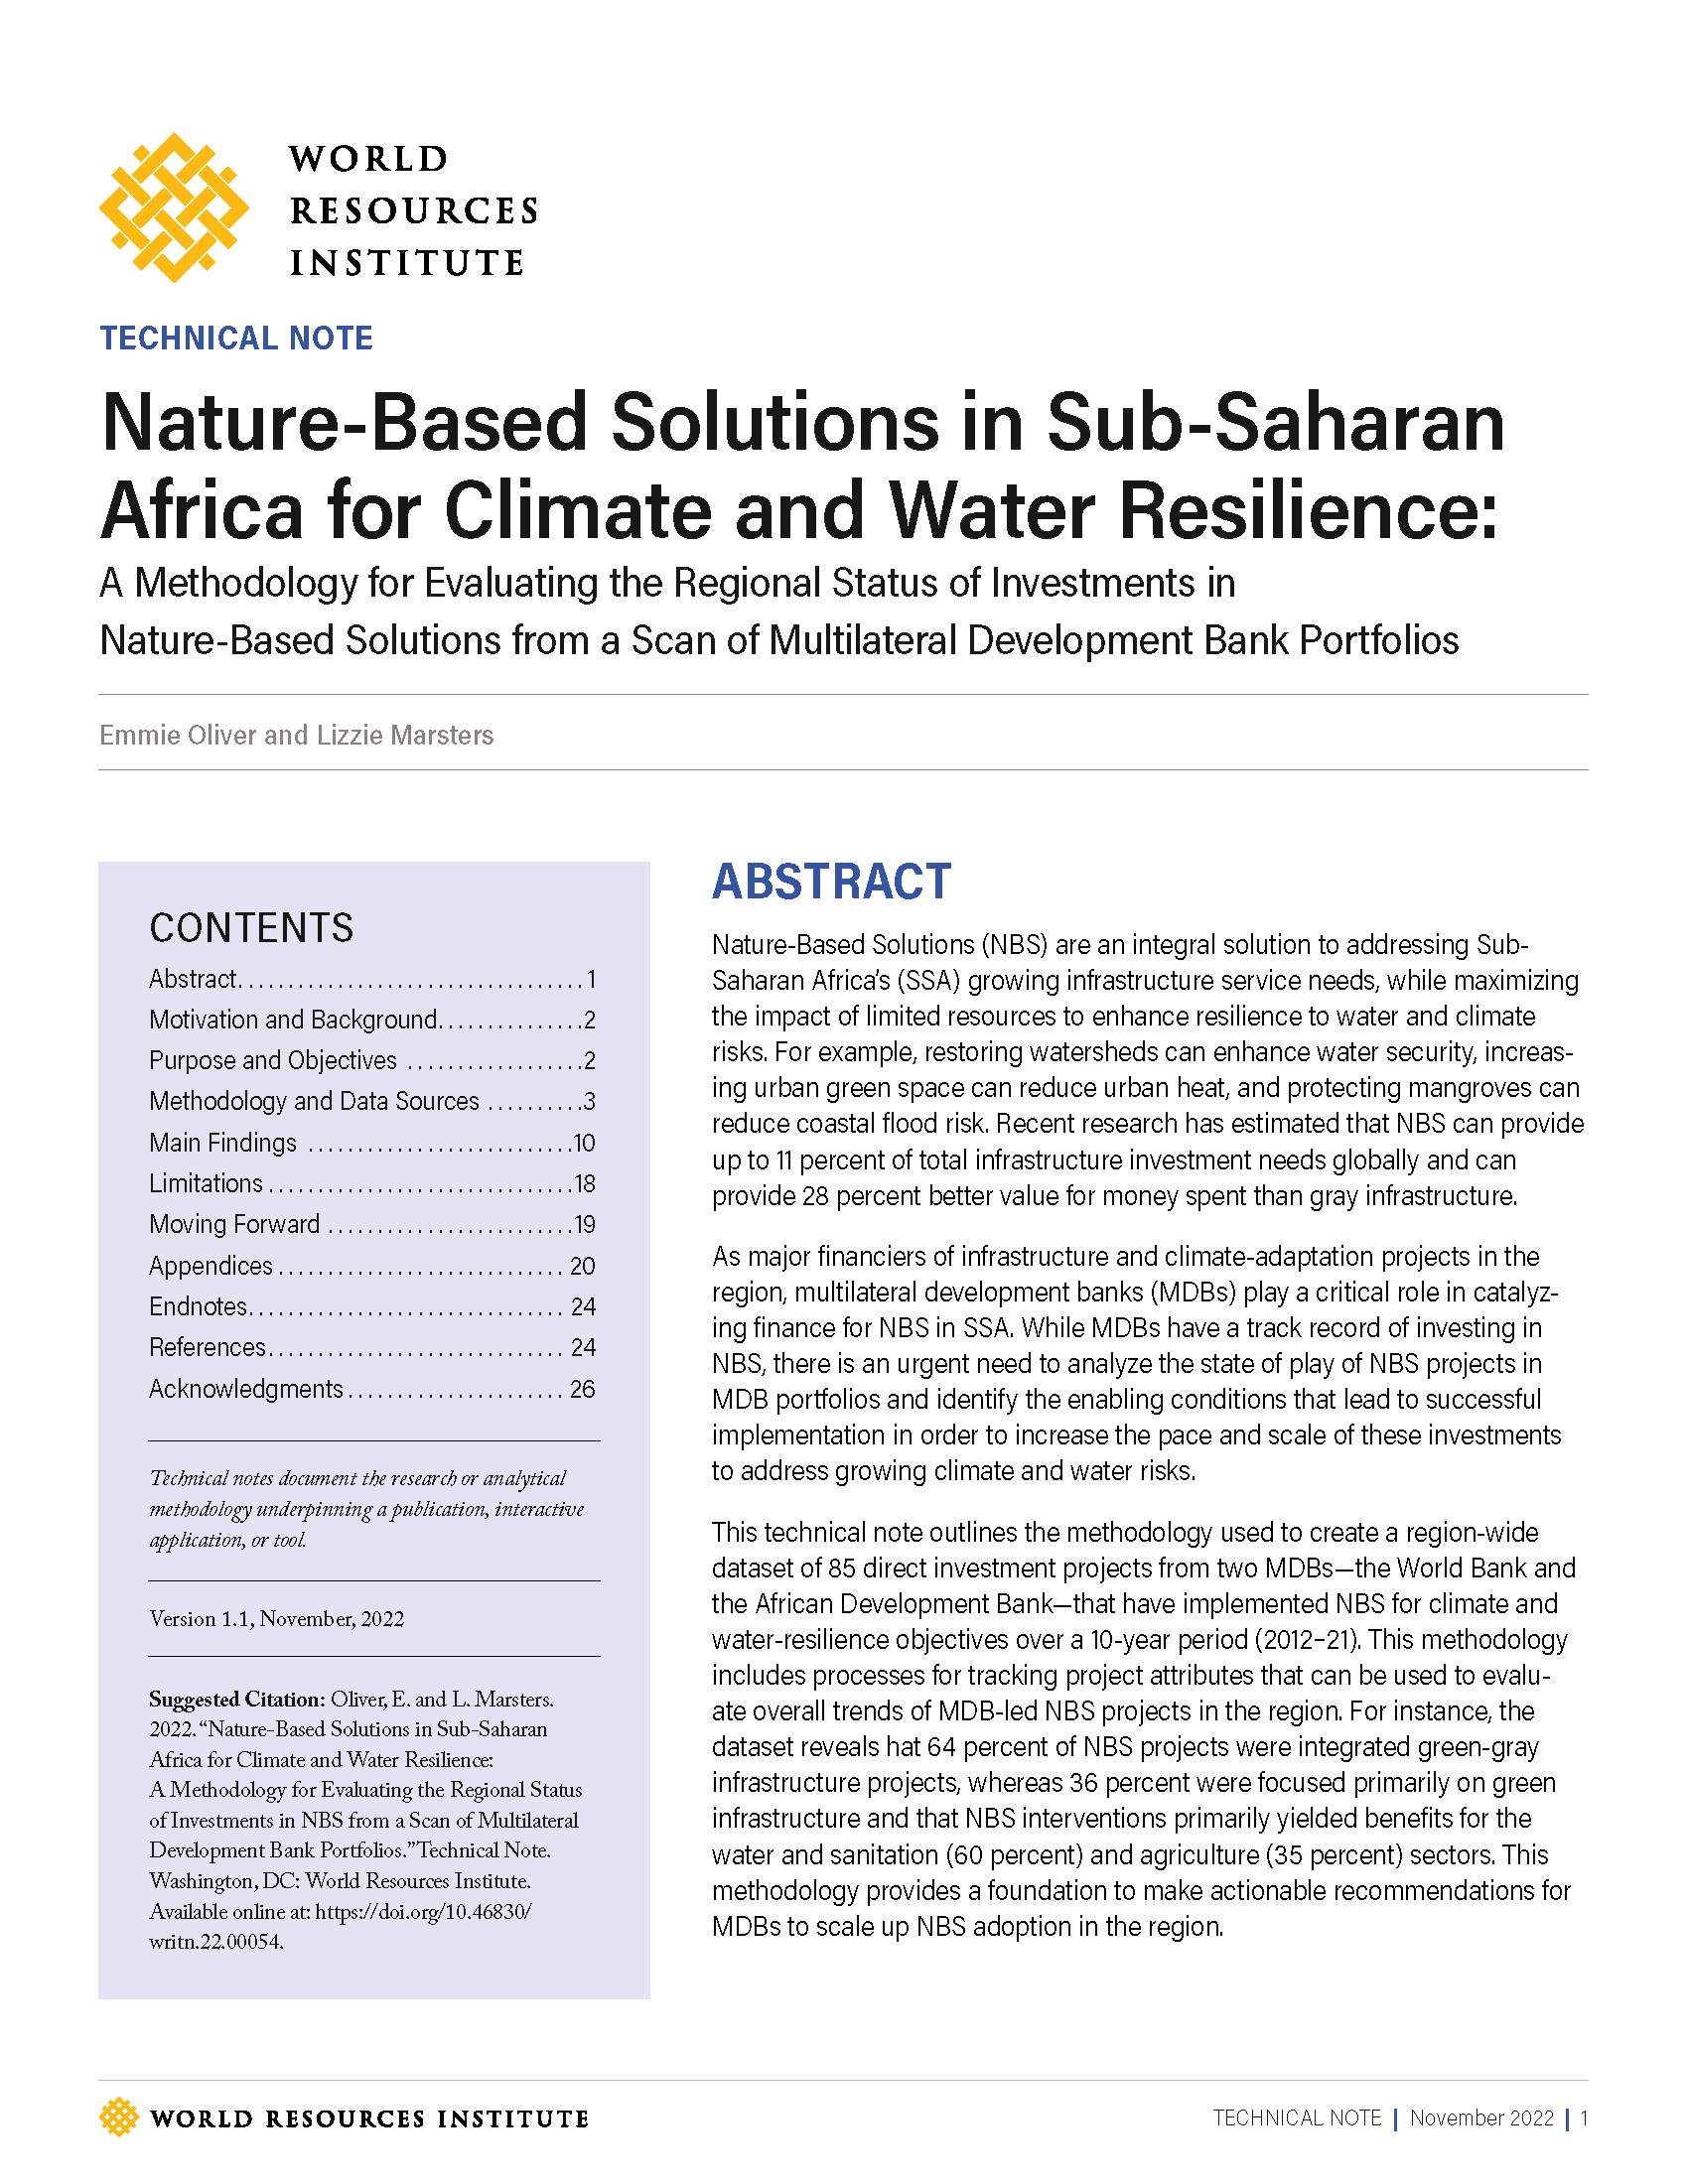 Cover page for Nature-Based Solutions in Sub-Saharan Africa for Climate and Water Resilience